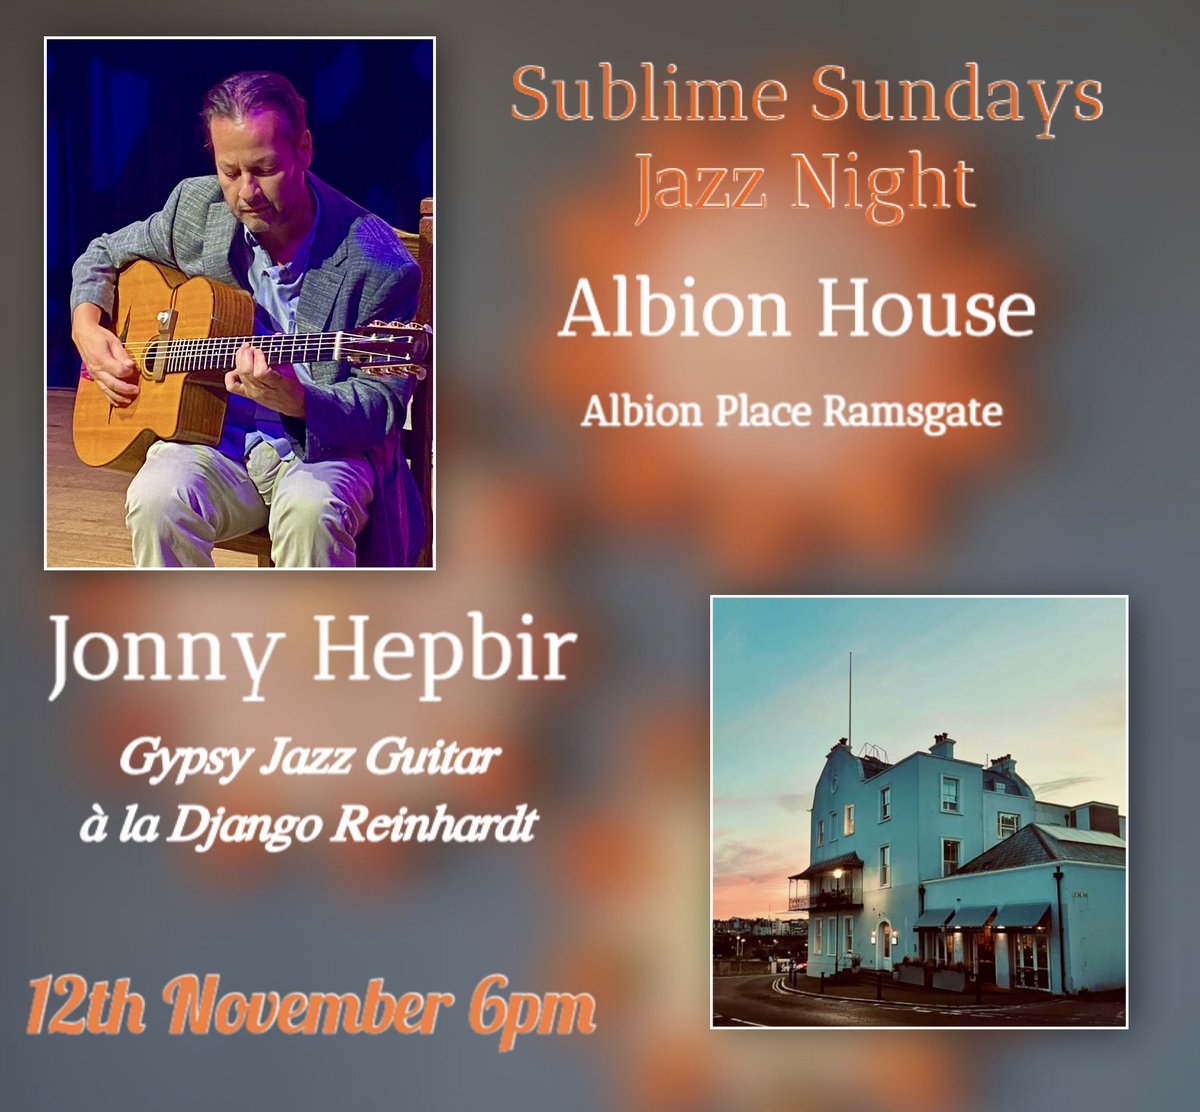 This coming Sunday 12th November from 6pm I’ll be playing #djangoreinhardt style #gypsyjazz #guitar at the sumptuous @albionhh in #ramsgate #kent come & eat fab food & drink in a chilled atmosphere with me playing catchy Parisian swing from yesterera! #ramsgatekent #albionhouse